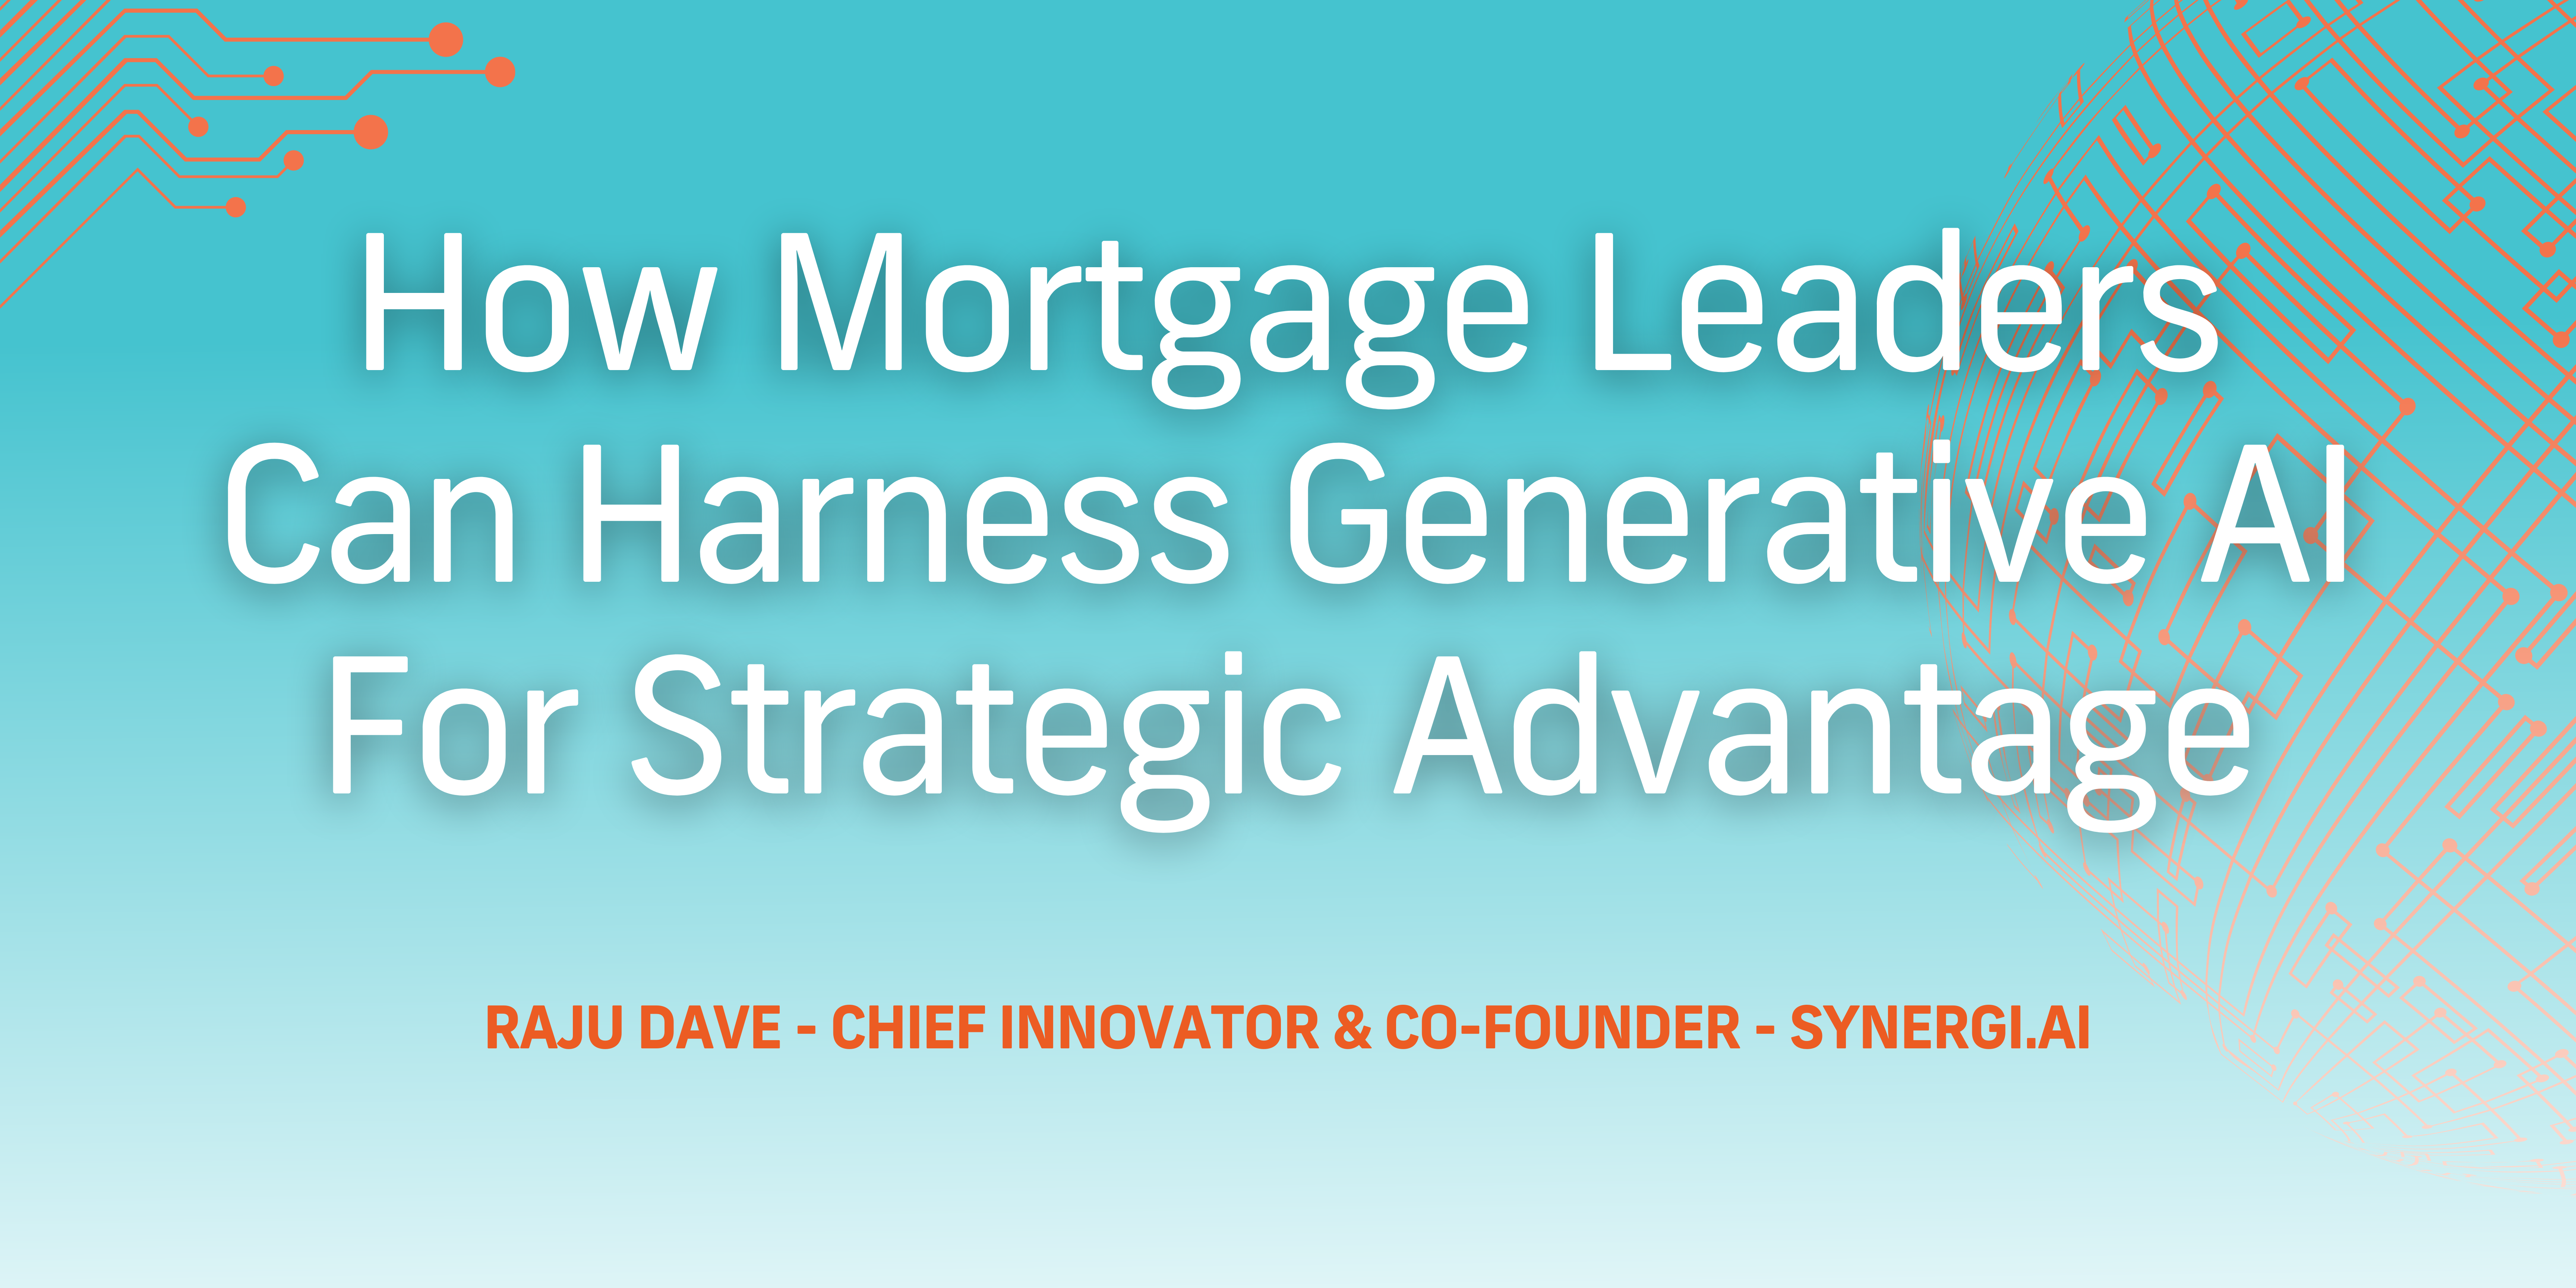 How Mortgage Lenders Can Harness Generative AI For Strategic Advantage